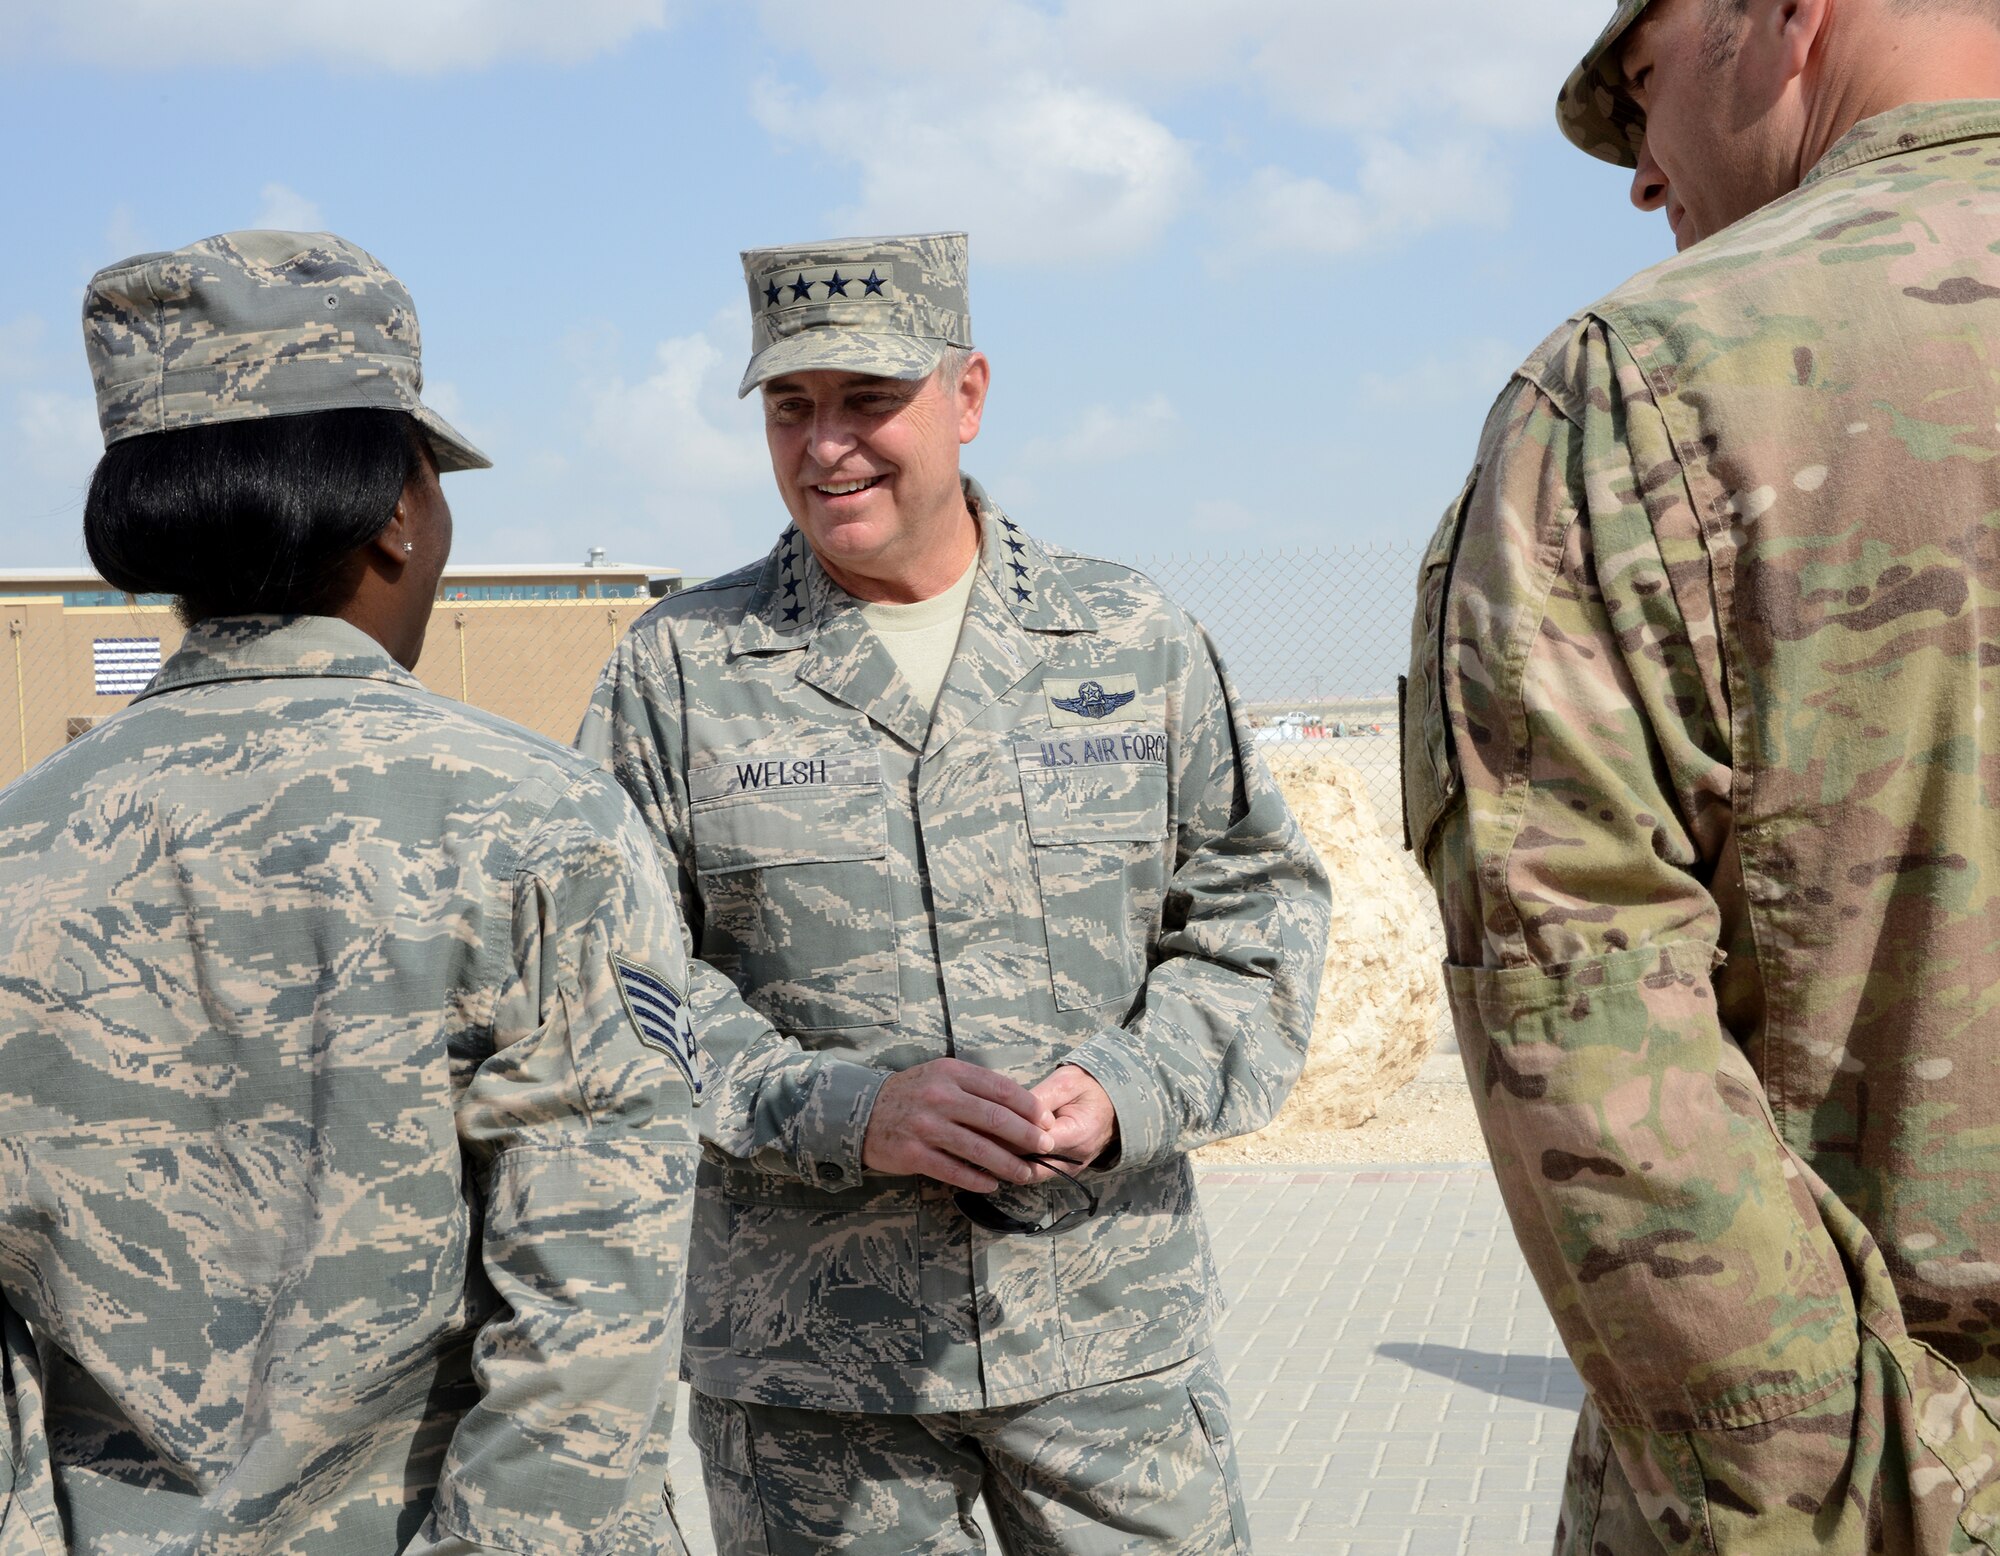 Air Force Chief of Staff Gen. Mark A. Welsh III speaks with Airmen during a base visit, Dec. 14, 2014, at Al Udeid Air Base, Qatar. Welsh met with Airmen to thank them for their service and discuss the sacrifices and challenges experienced while deployed. (U.S. Air Force photo/Senior Airman Kia Atkins)